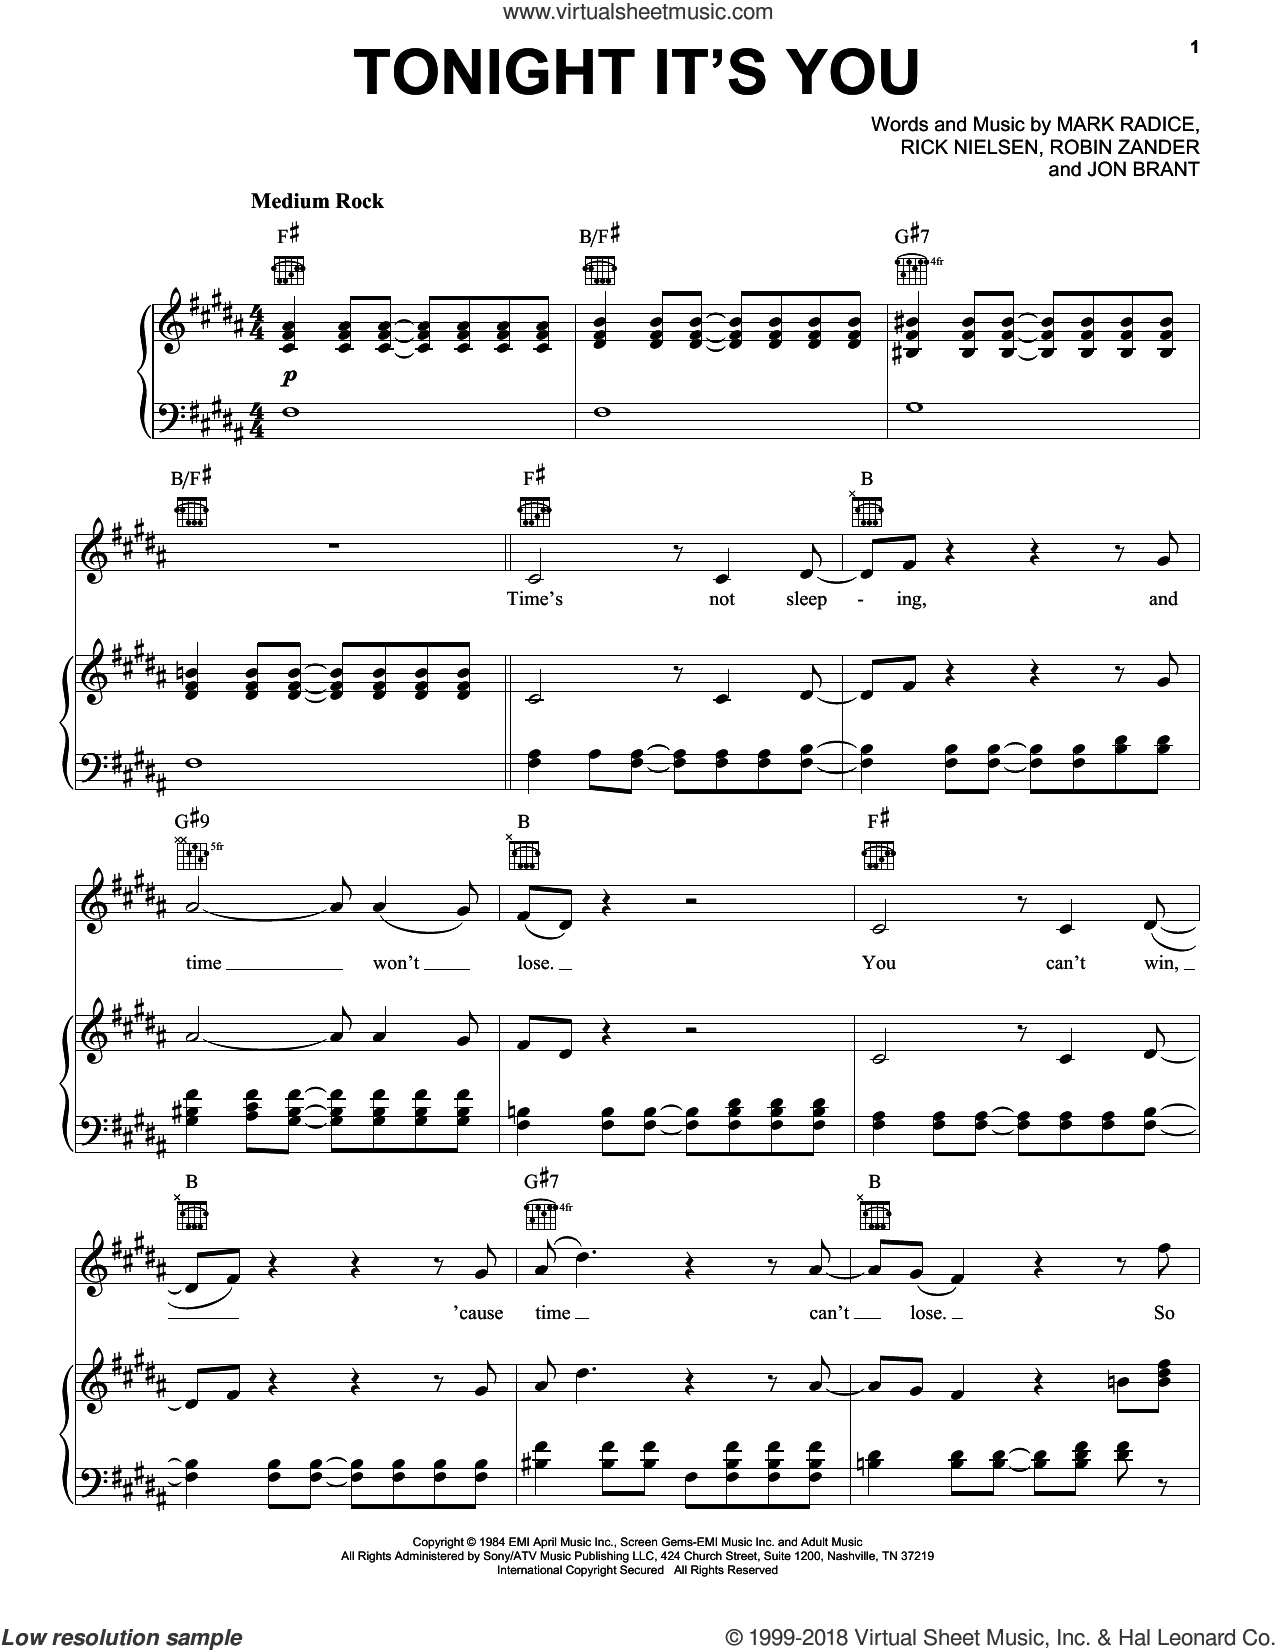 Call You Tonight sheet music for voice, piano or guitar (PDF)